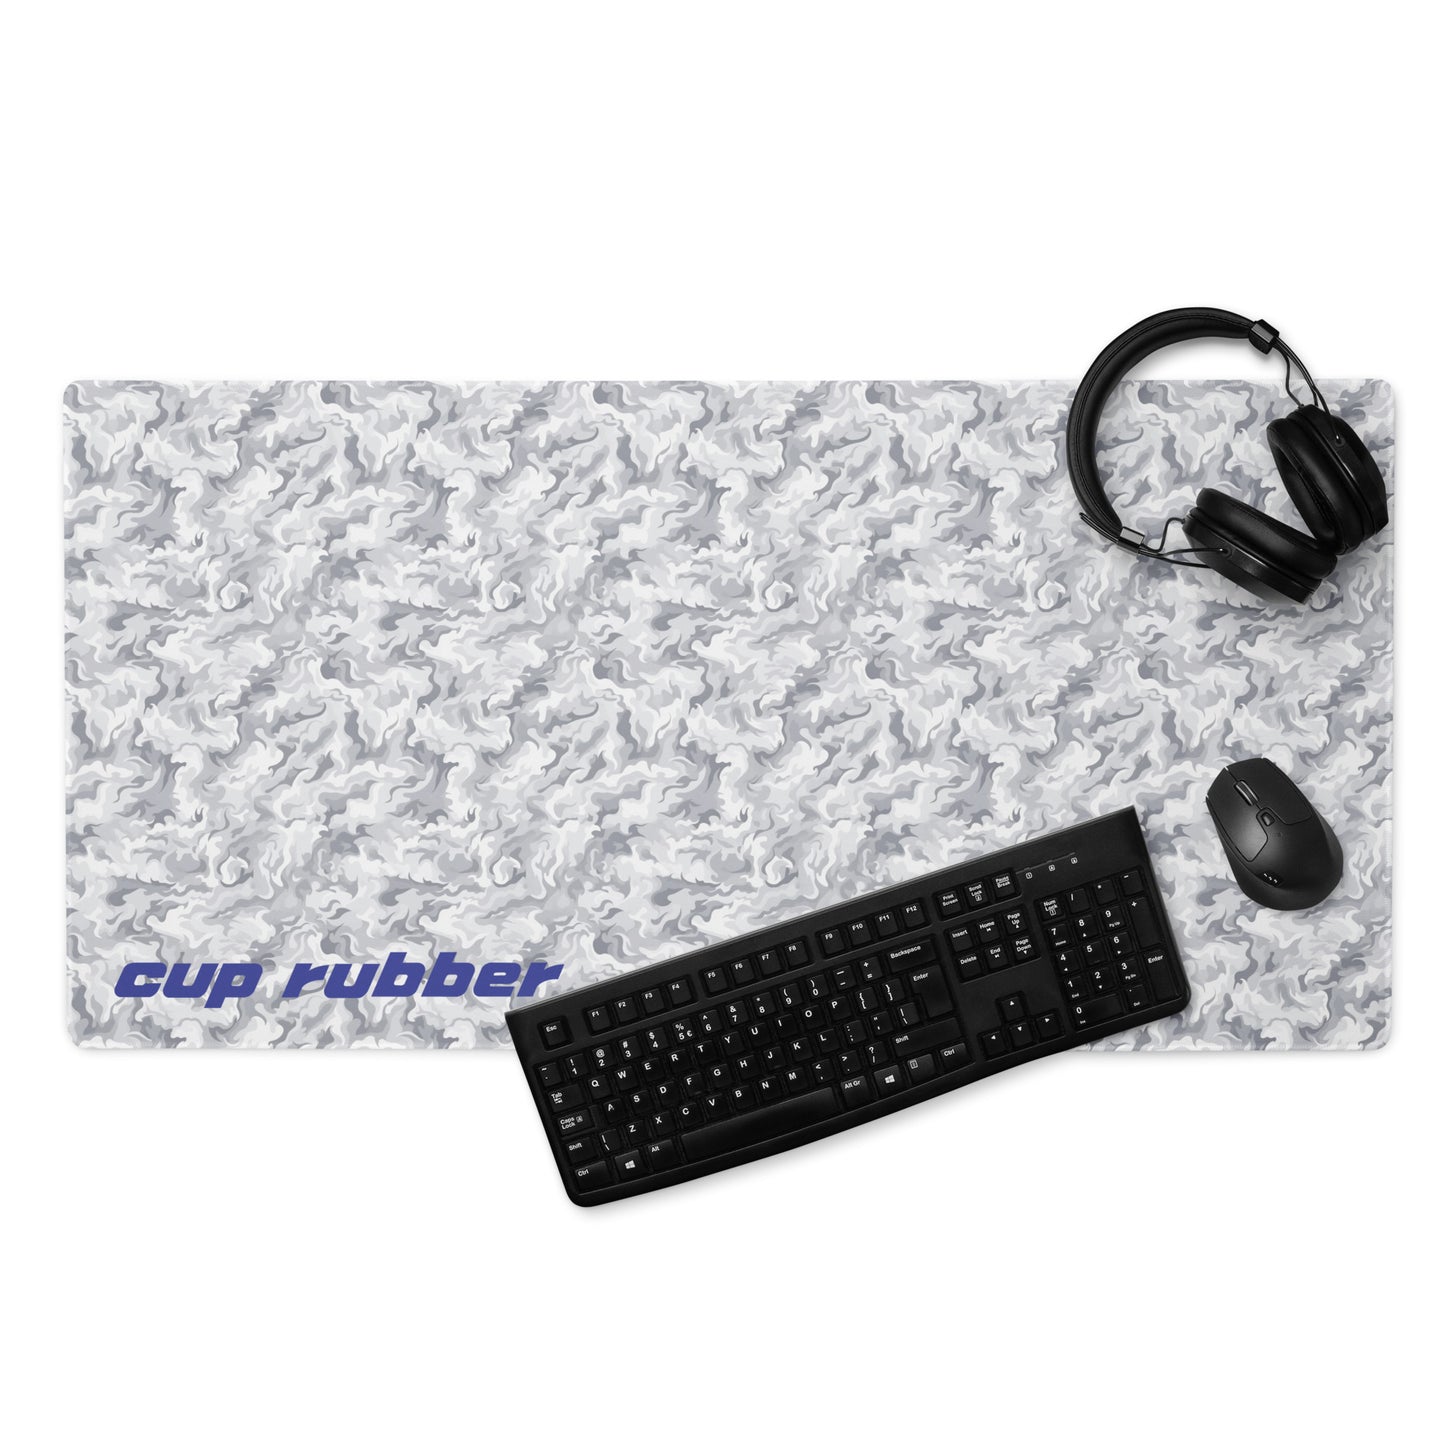 A 36" x 18" desk pad with a camo pattern and the word "Cup Rubber" on it in the bottom left corner displayed with a keyboard, headphones and a mouse. Beige and White in color.